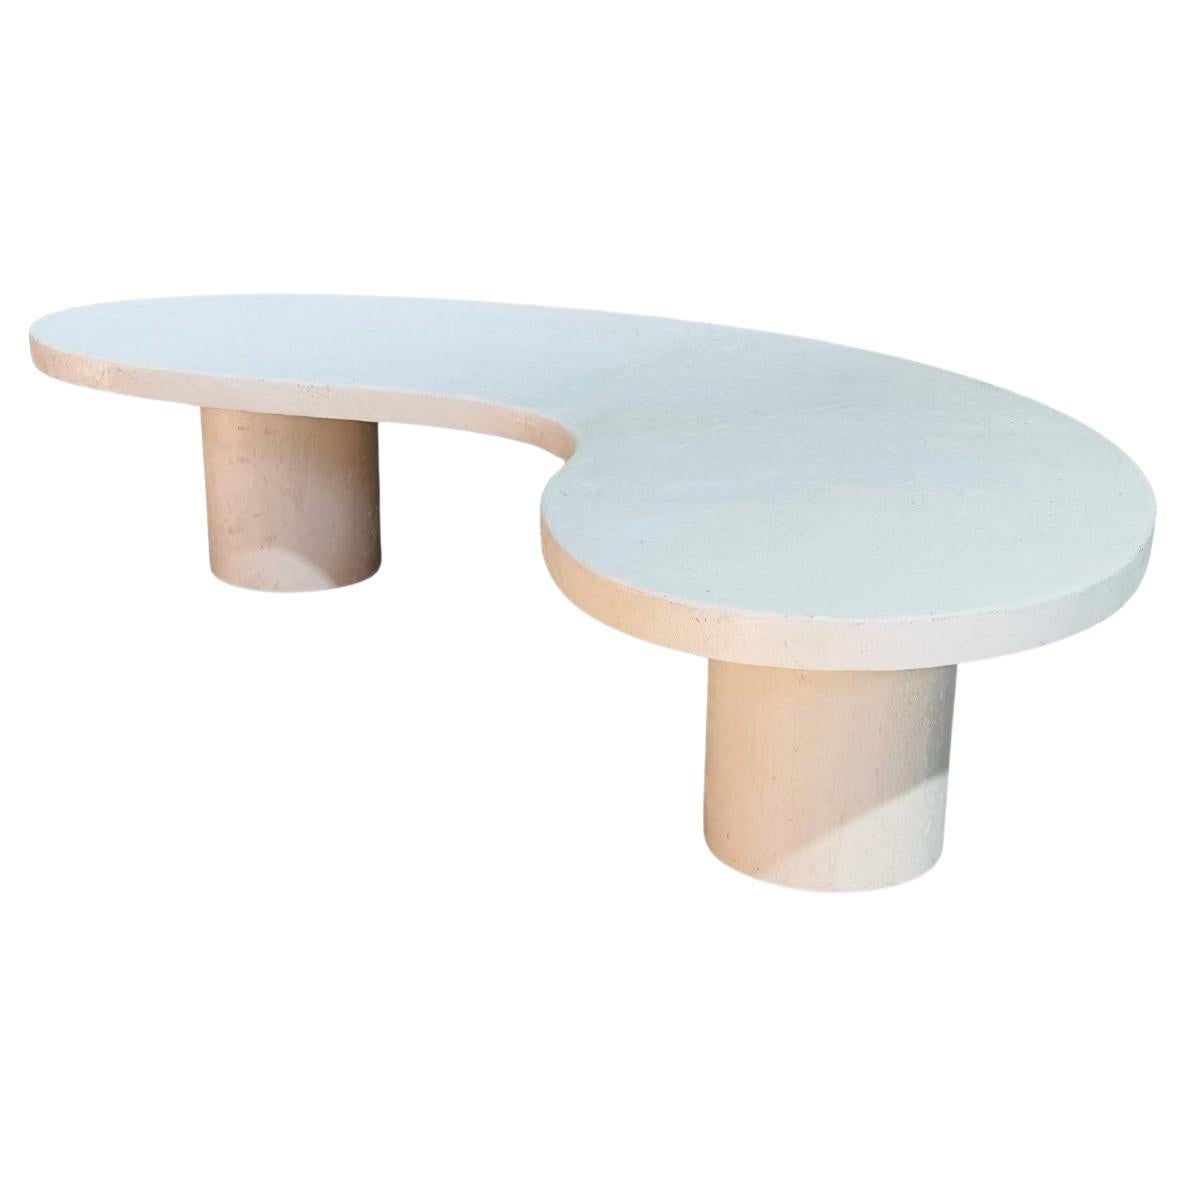 Post Modern Biomorphic Parra Plaster Molded Concrete Coffee Table, 1980 For Sale